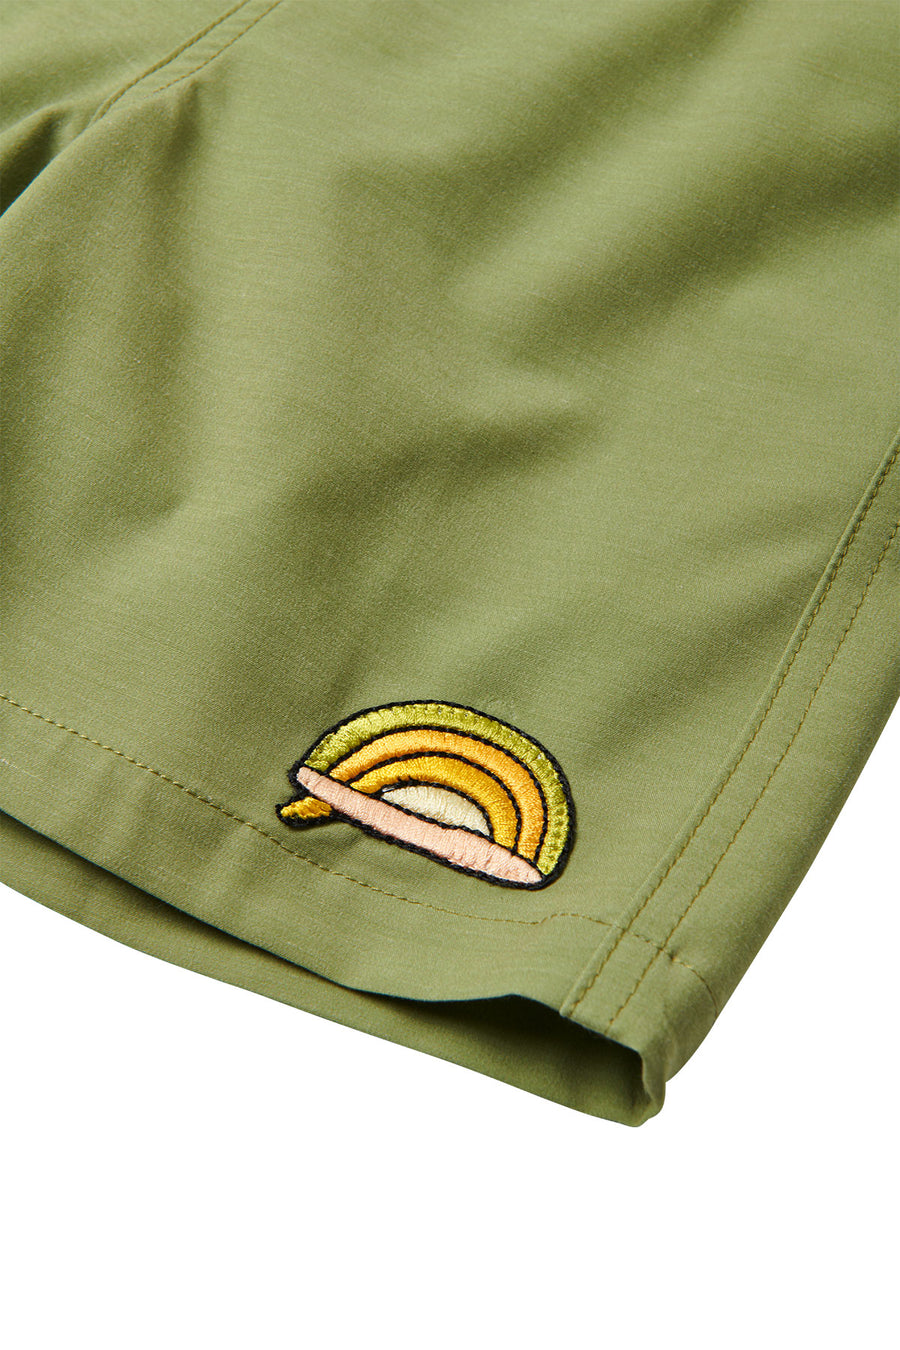 Seaesta Stay Dry Walk Short With Liner | Surfy Birdy | Pine